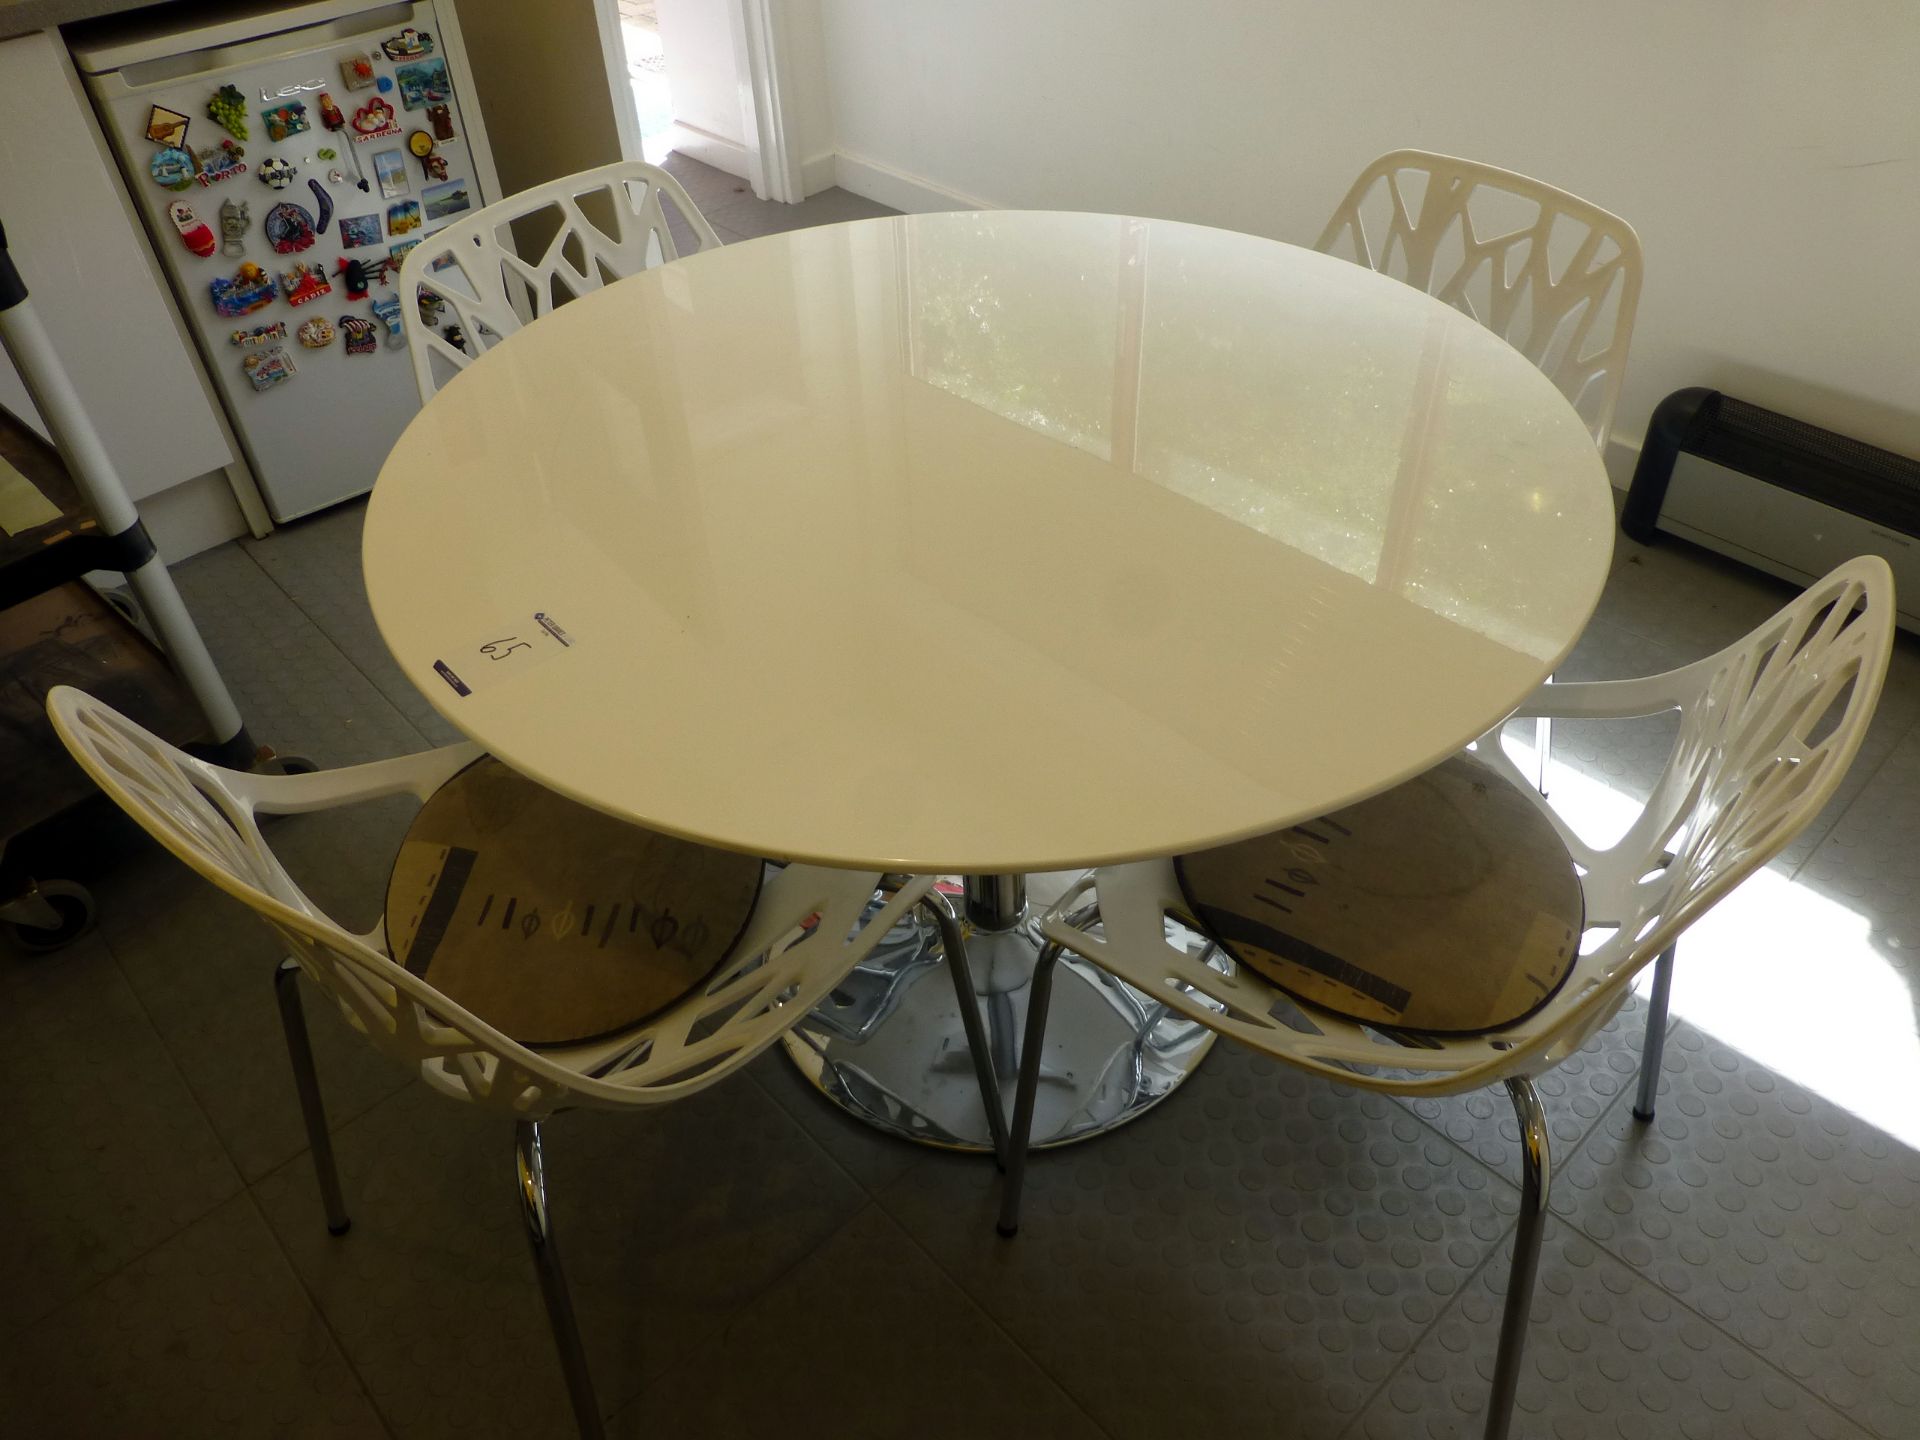 Circular Dining Table, White Composite Topped (1100mm Diameter) with Chrome Foot & 4 Matching Chrome